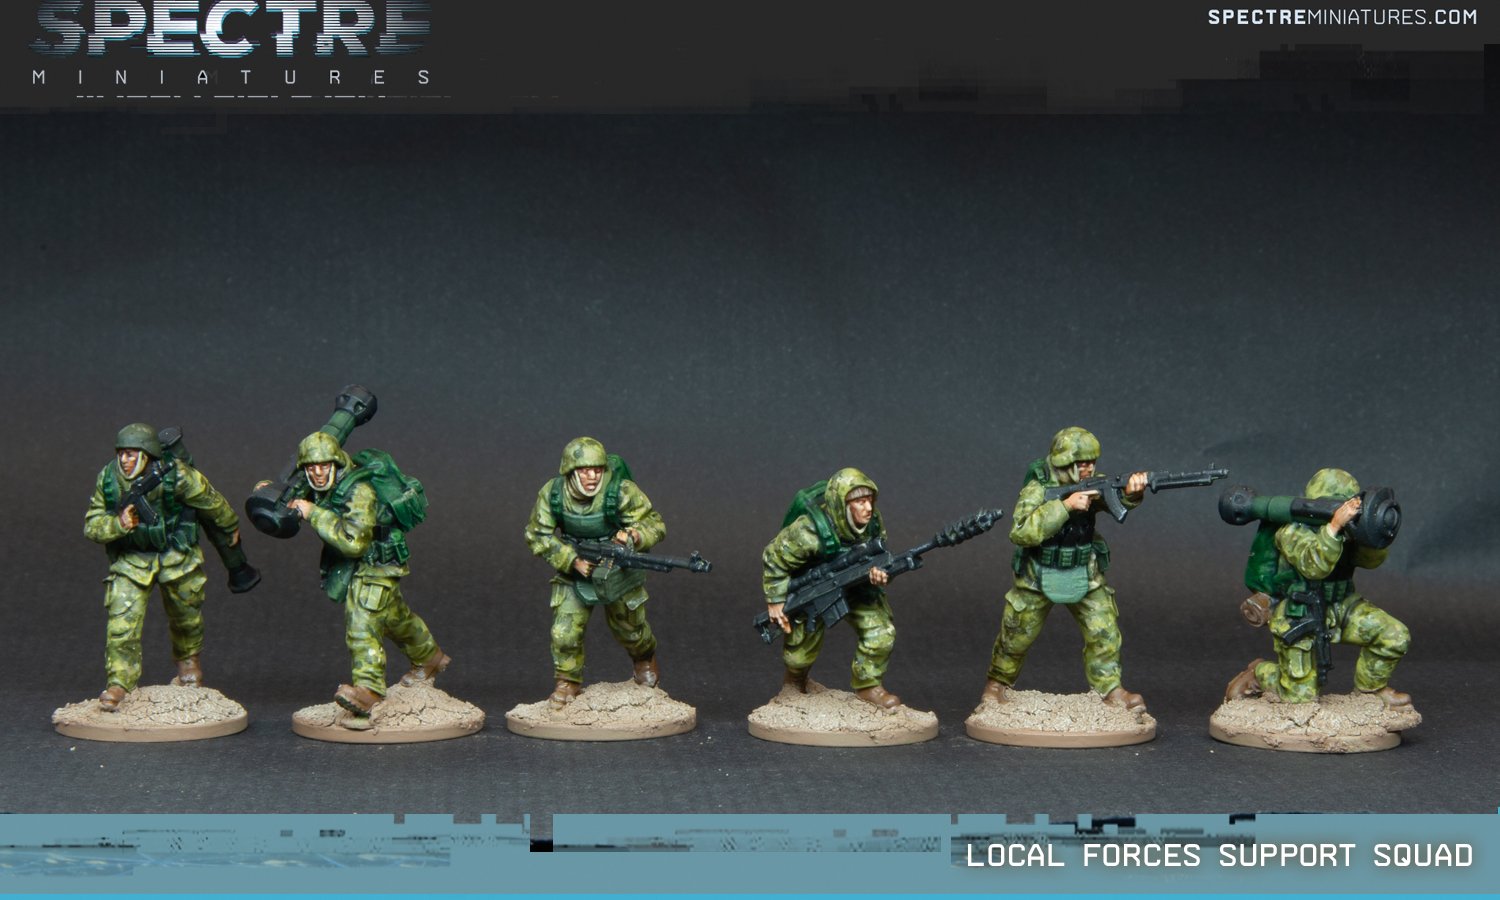 Local Forces Support Squad - Spectre Miniatures